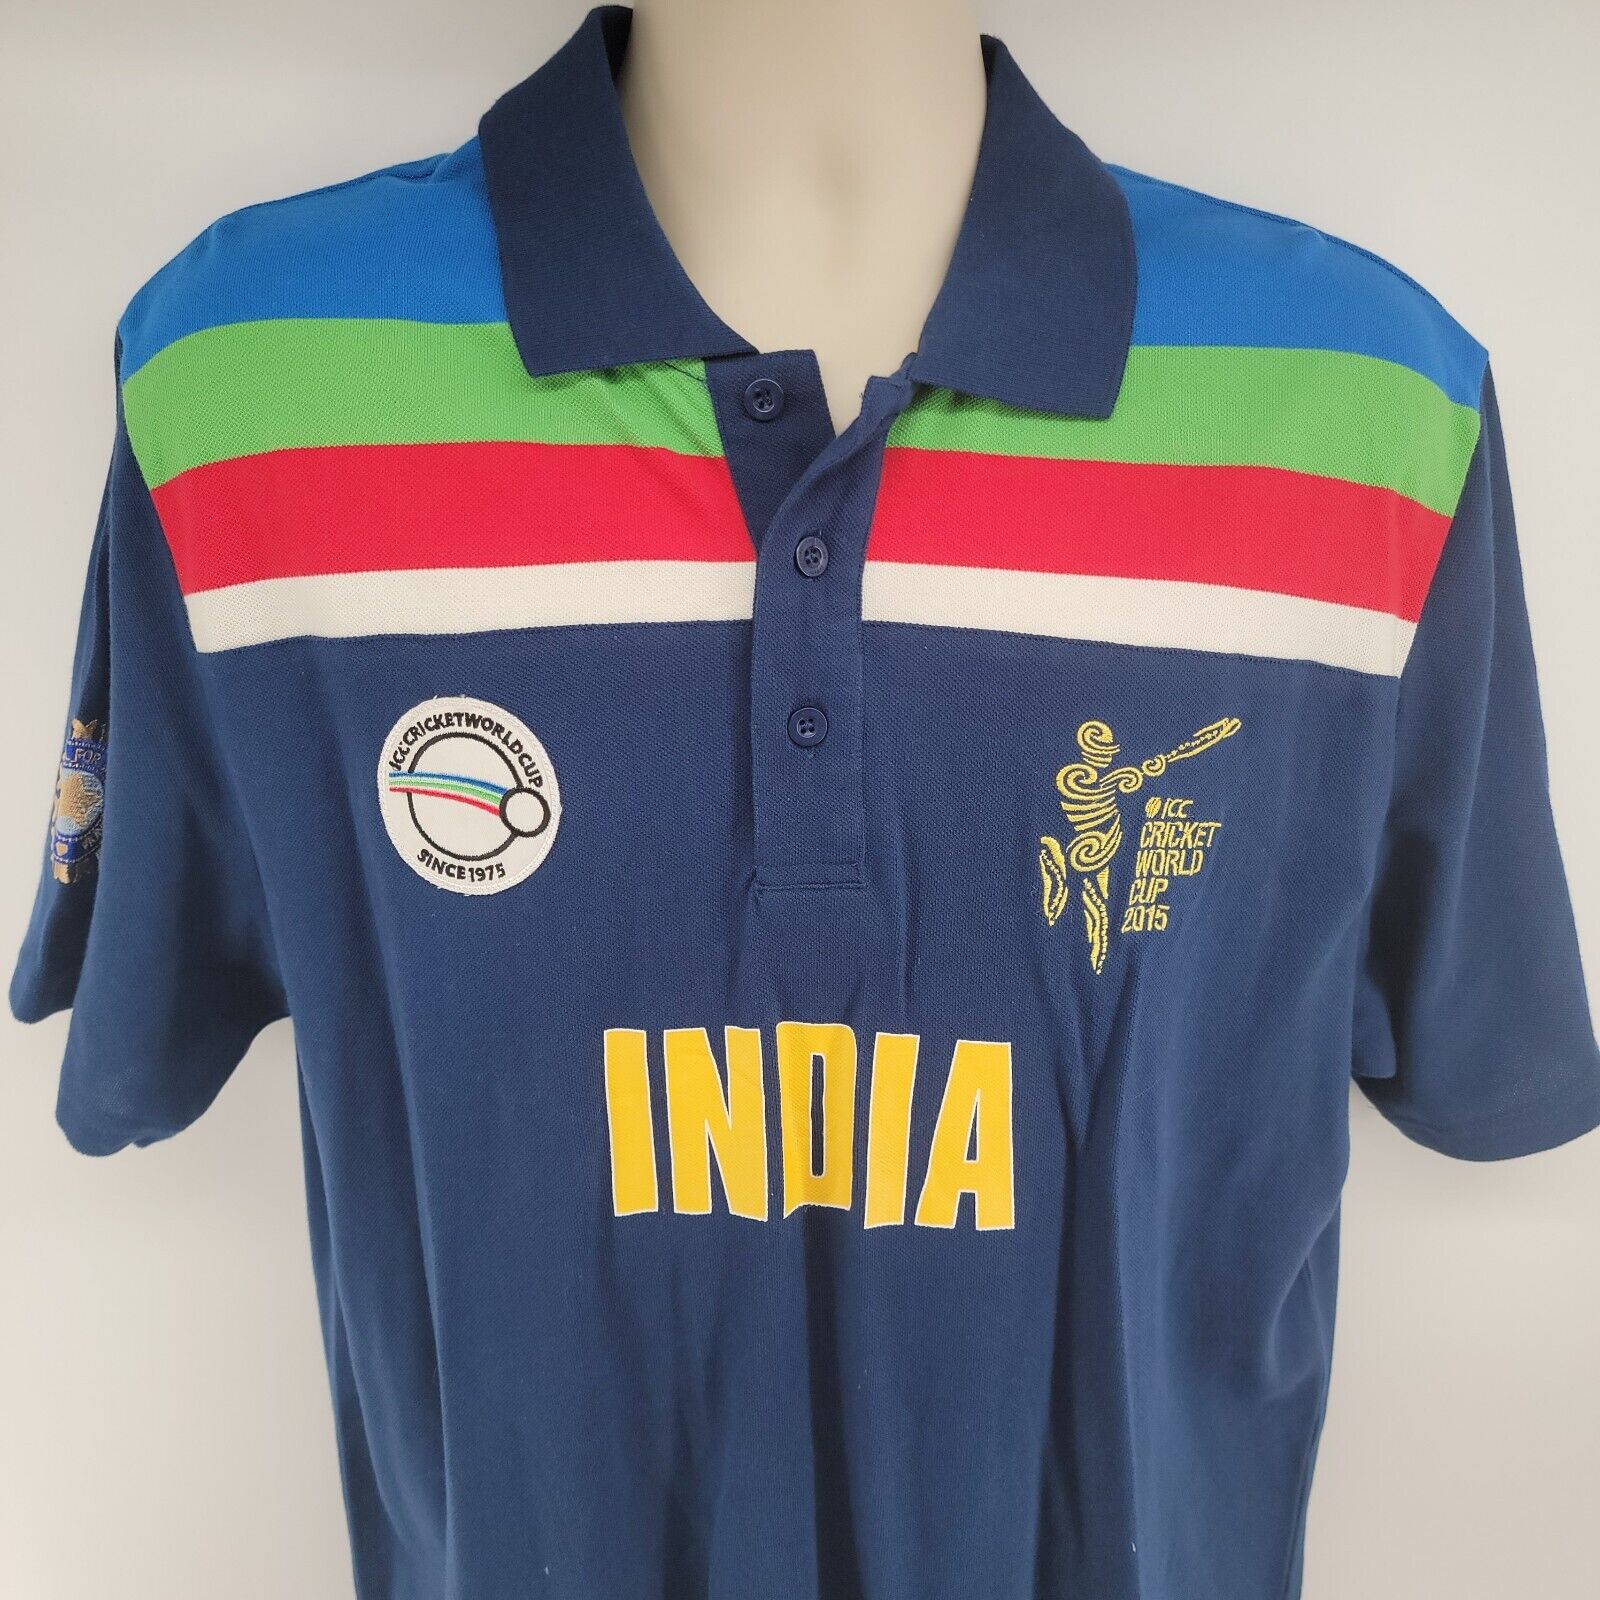 ICC Cricket World Cup 2015 India Jersey Polo Shirt Mens 2XL ICC Cricket World Cup CWC12398 - фотография #4